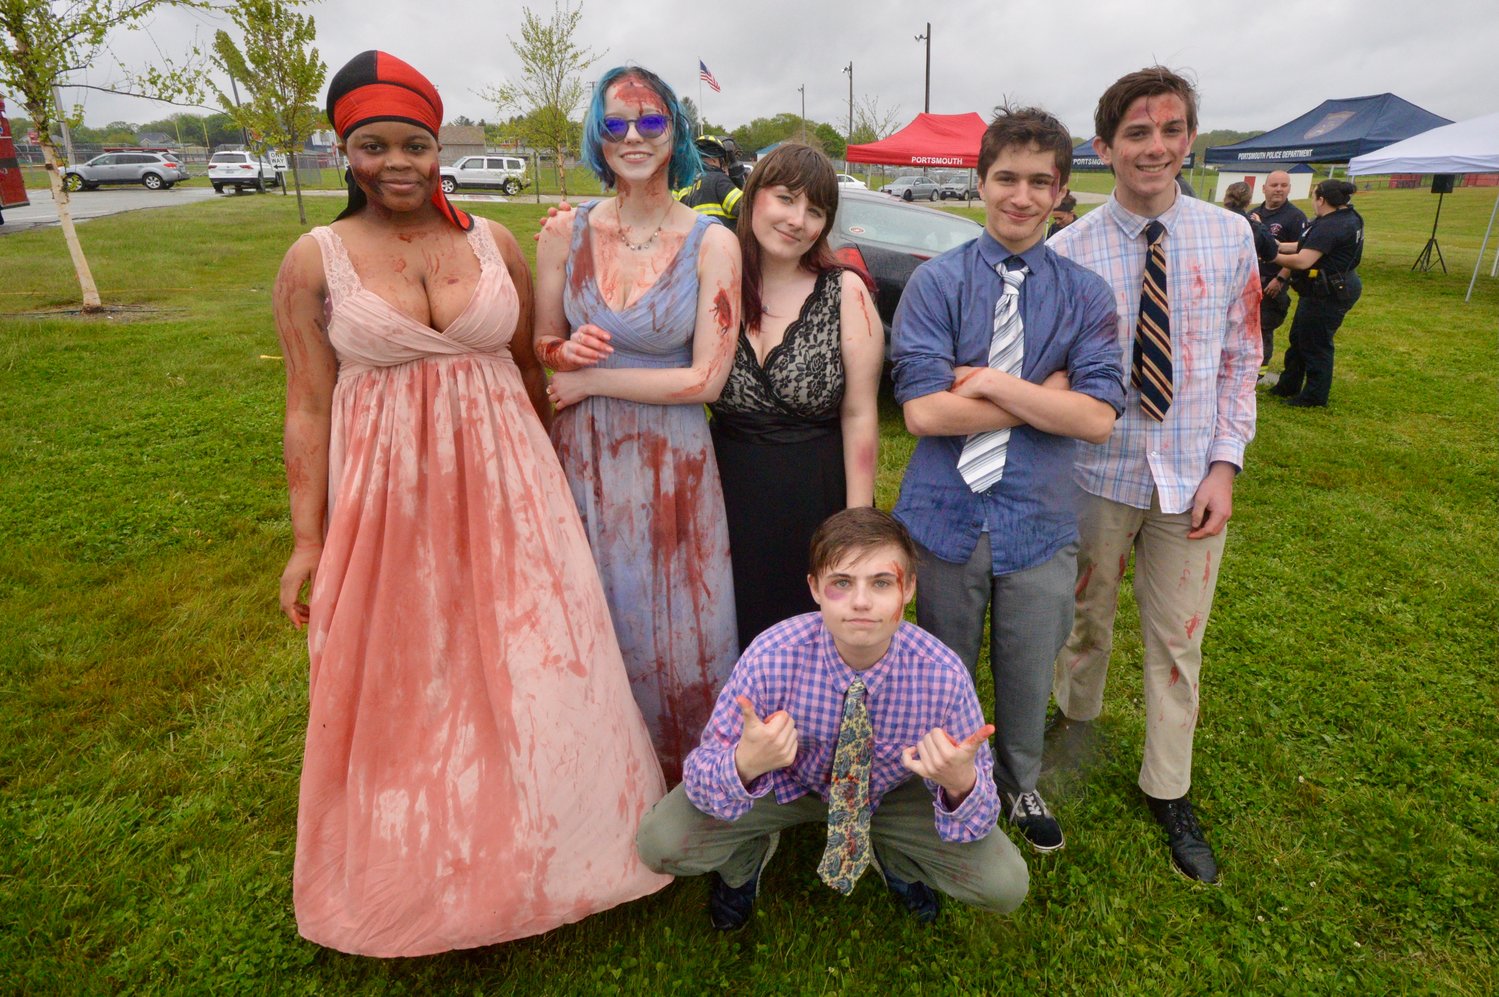 They may look like the cast from a slasher or zombie flick, but these (fake) blood-spattered Portsmouth High School students were actually actors in a mock drunk-driving crash reenactment staged by the Portsmouth Police Department outside PHS last week. They are (from left): Renesha Duncan, Megan Conant, Anastacia Inman, Josh Champagne (squatting), Walker Anderson, and Jackson Benner.